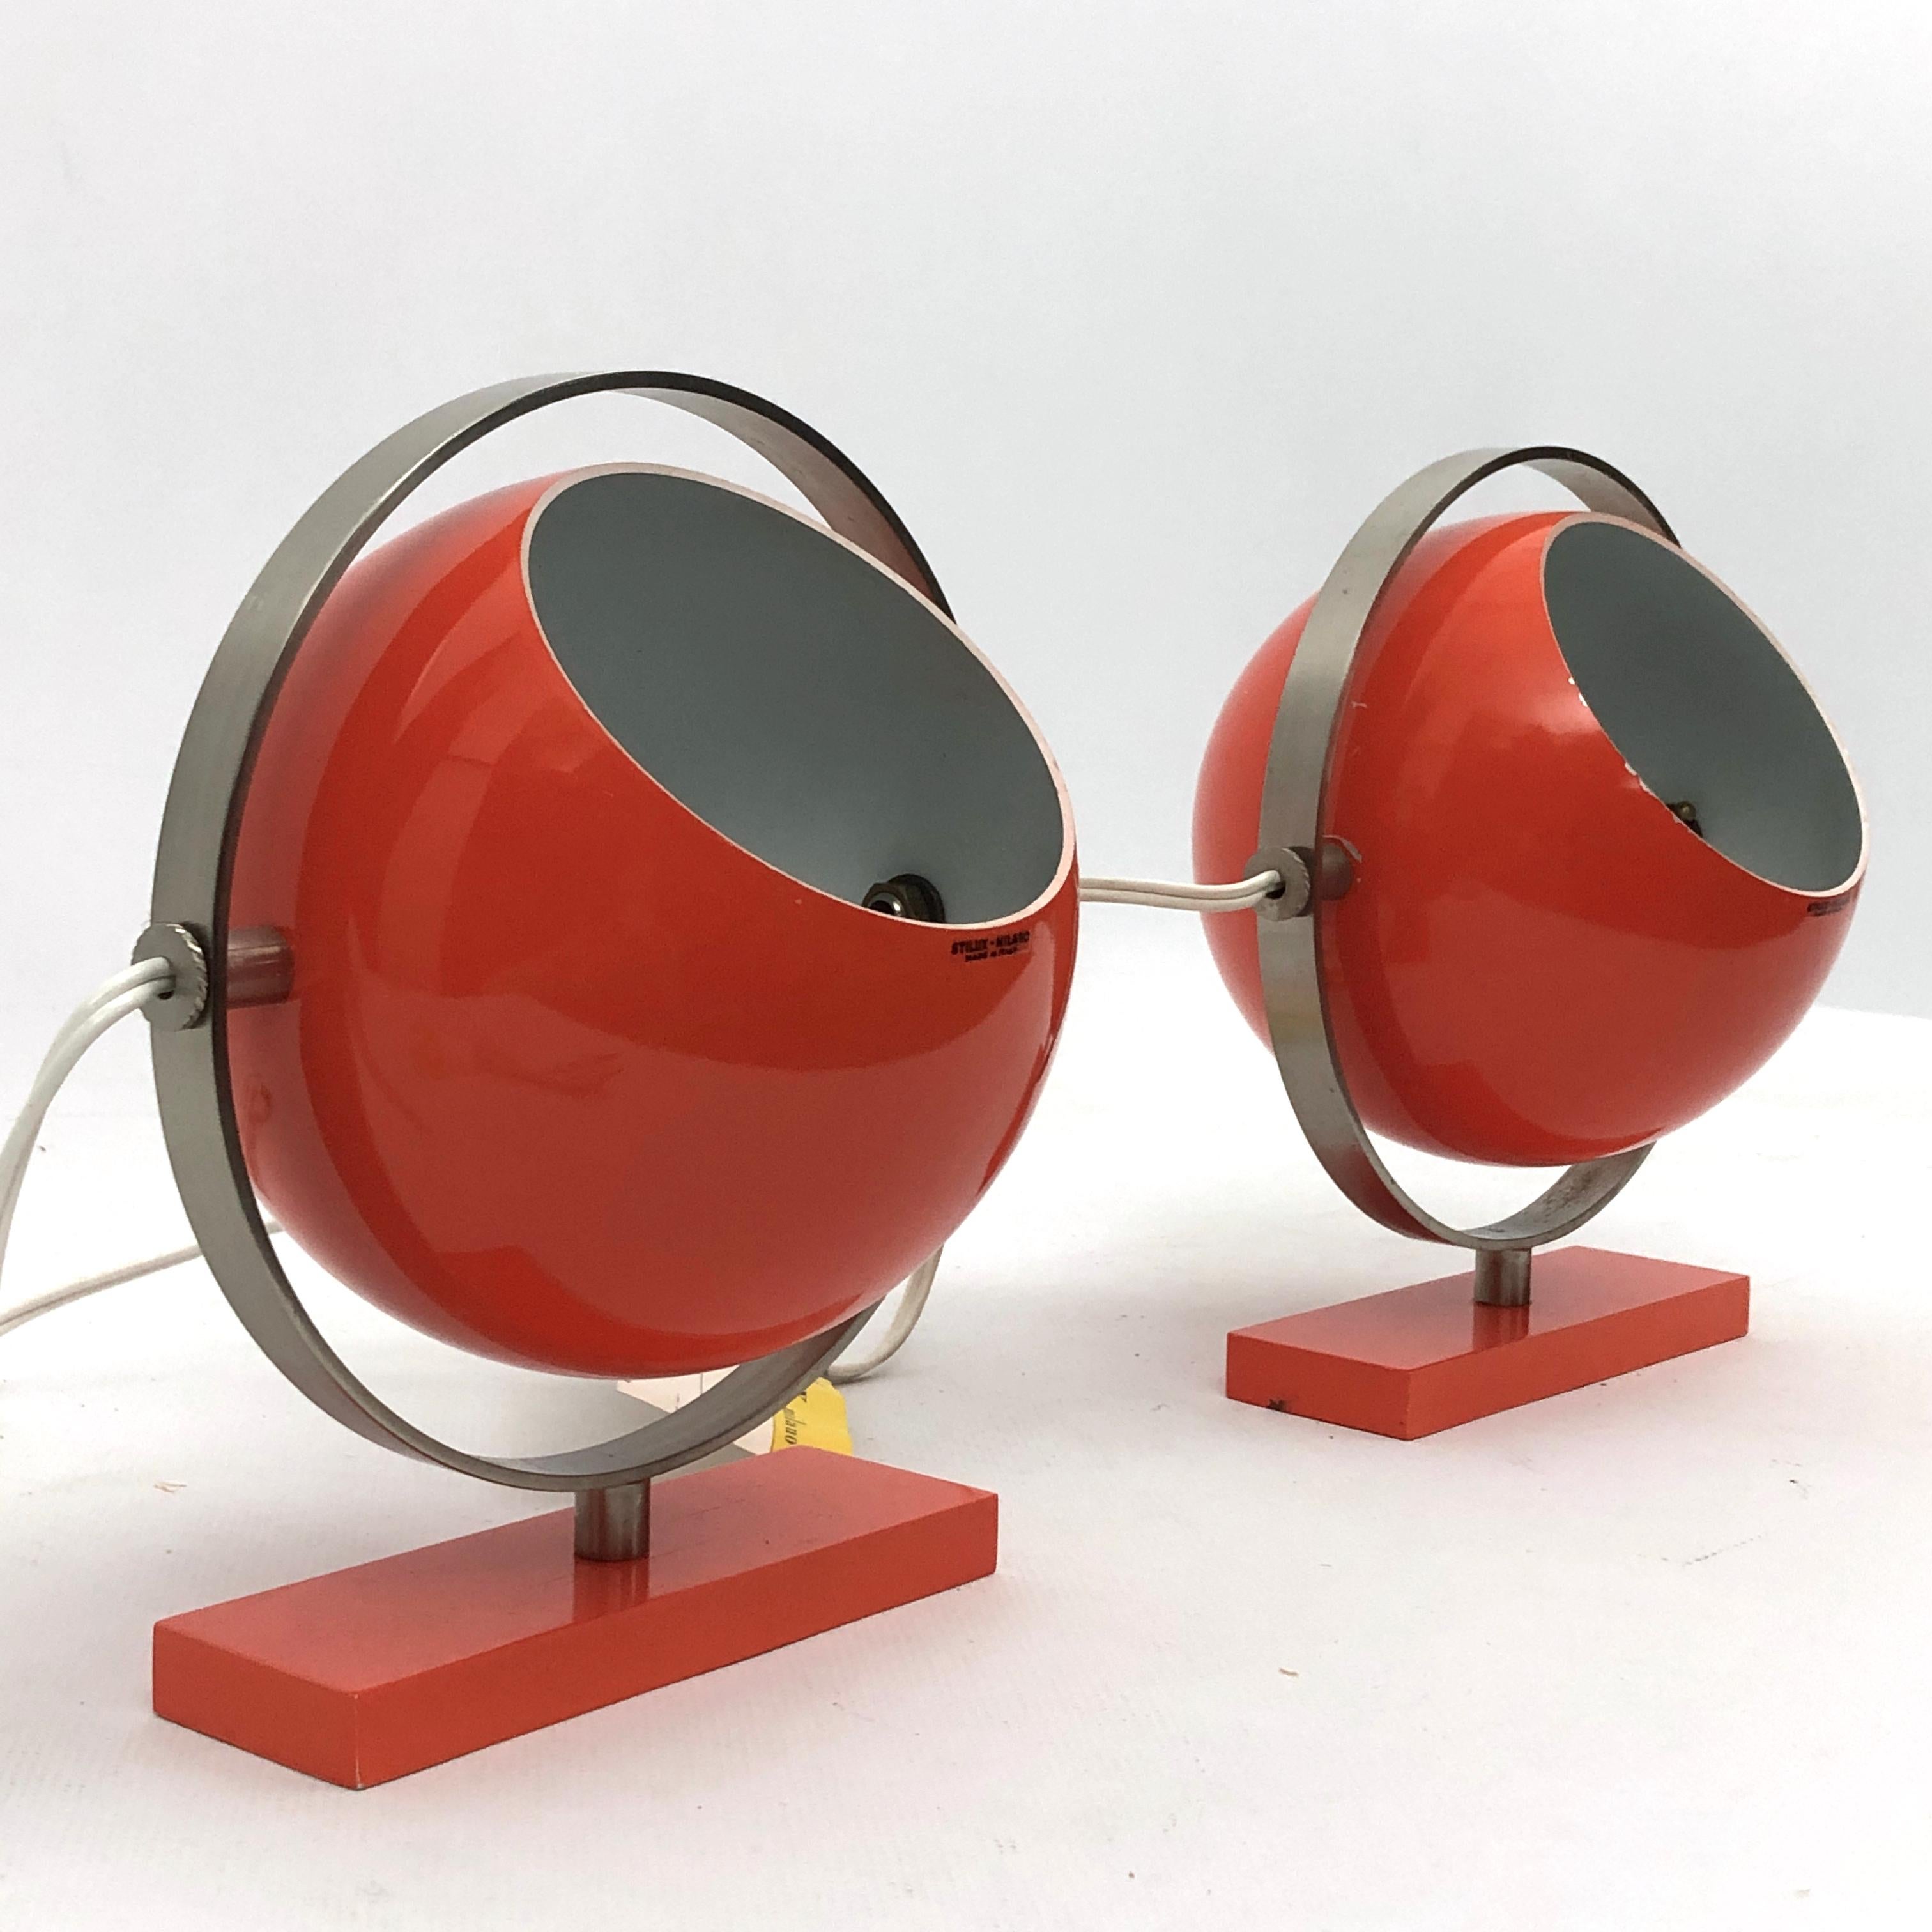 Stilux Milano Model Saba, Rare Orange Globe Table Lamps from 60s. Set of Two For Sale 4